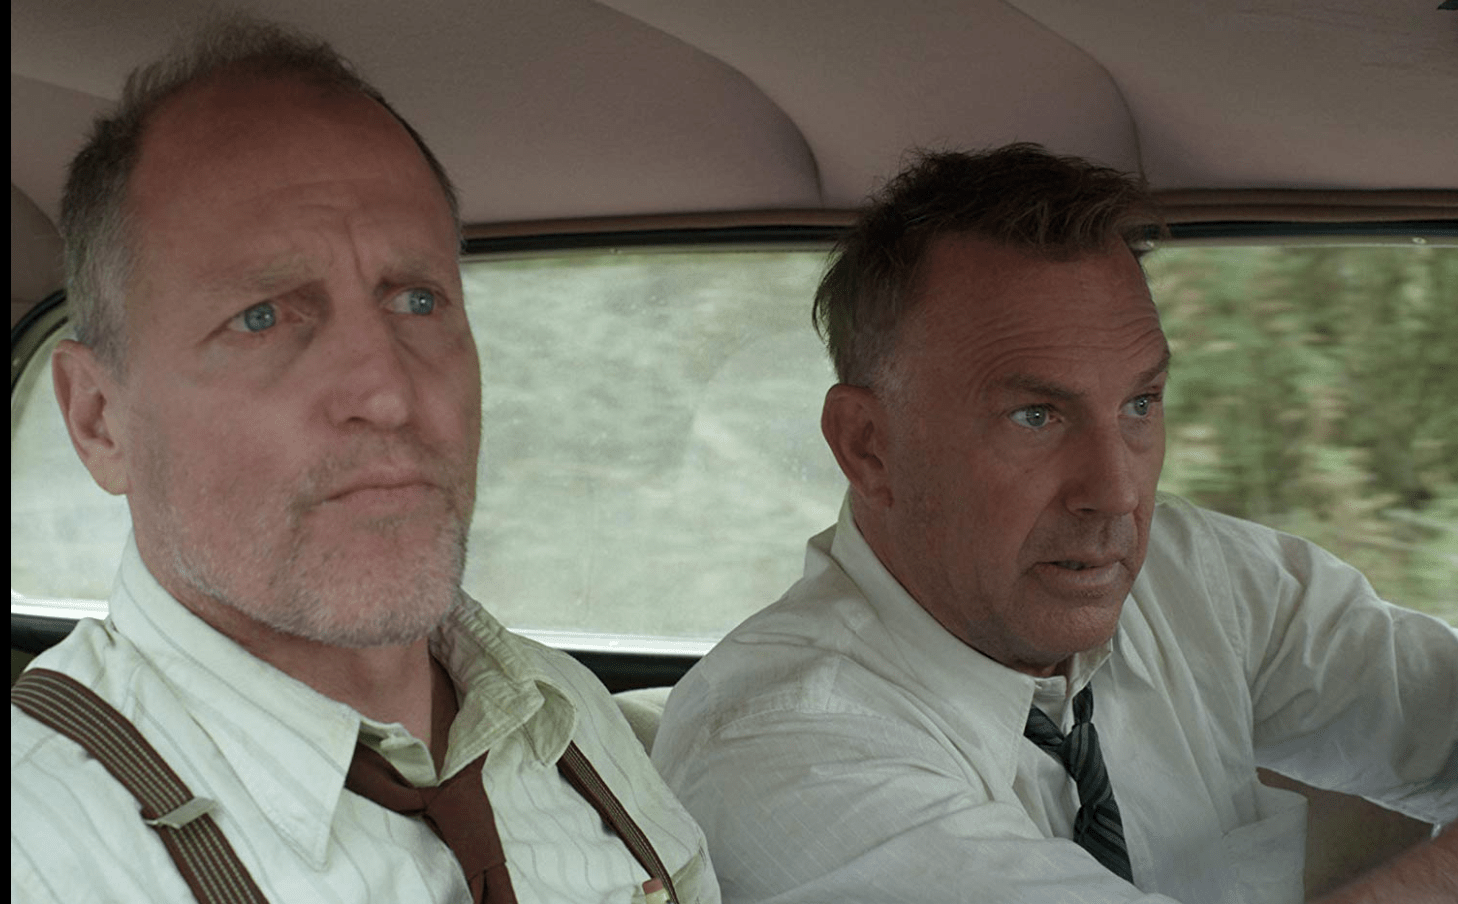 Woody Harrelson and Kevin Costner, right, in a scene from the trailer on IMDB.com for "The Highwaymen." (IMDB)